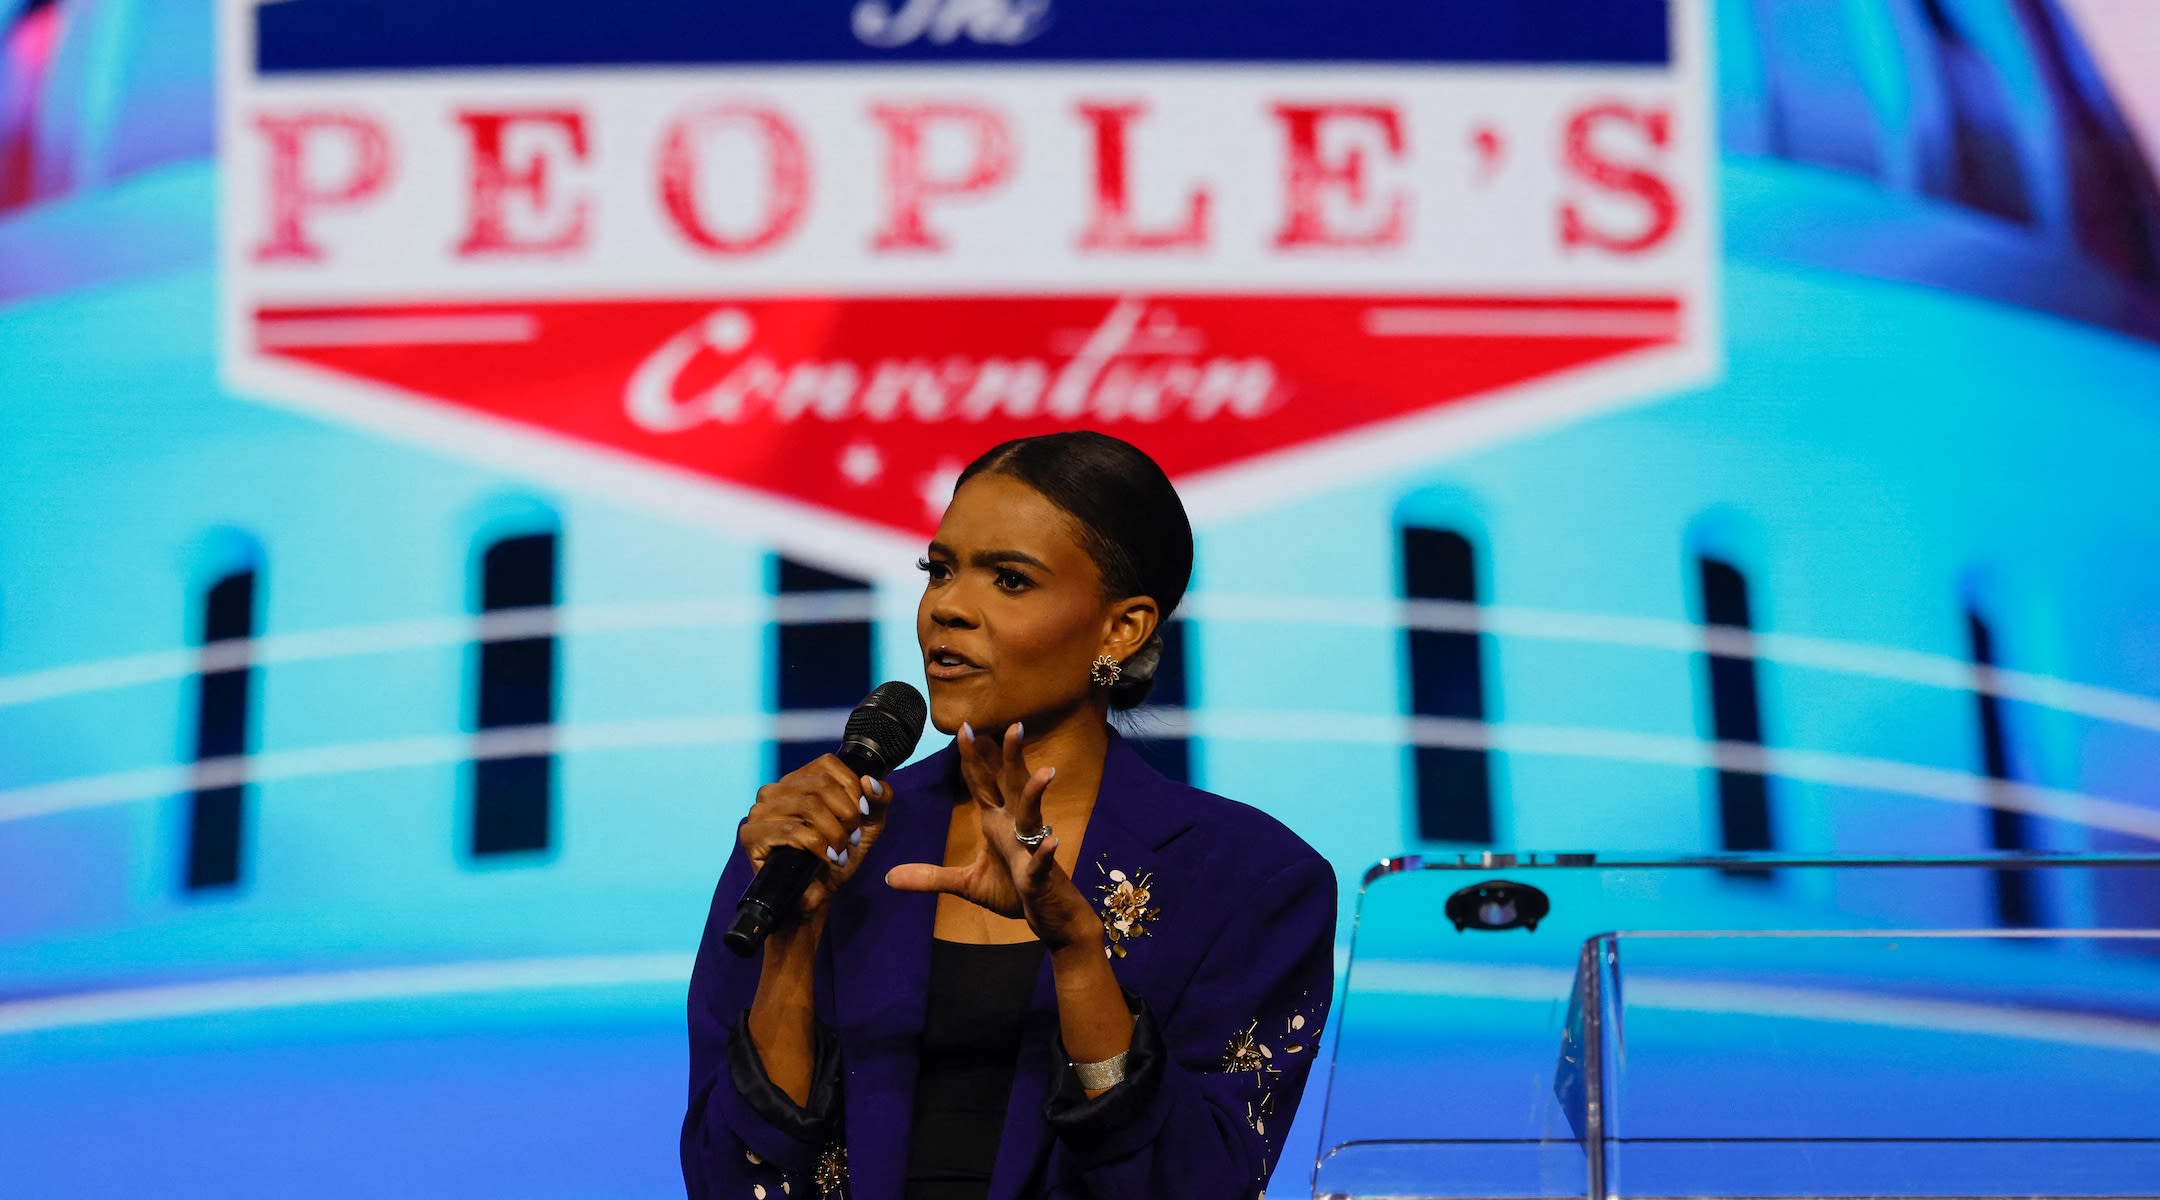 Trump fundraiser drops Candace Owens after backlash over her embrace of antisemitism - Jewish Telegraphic Agency